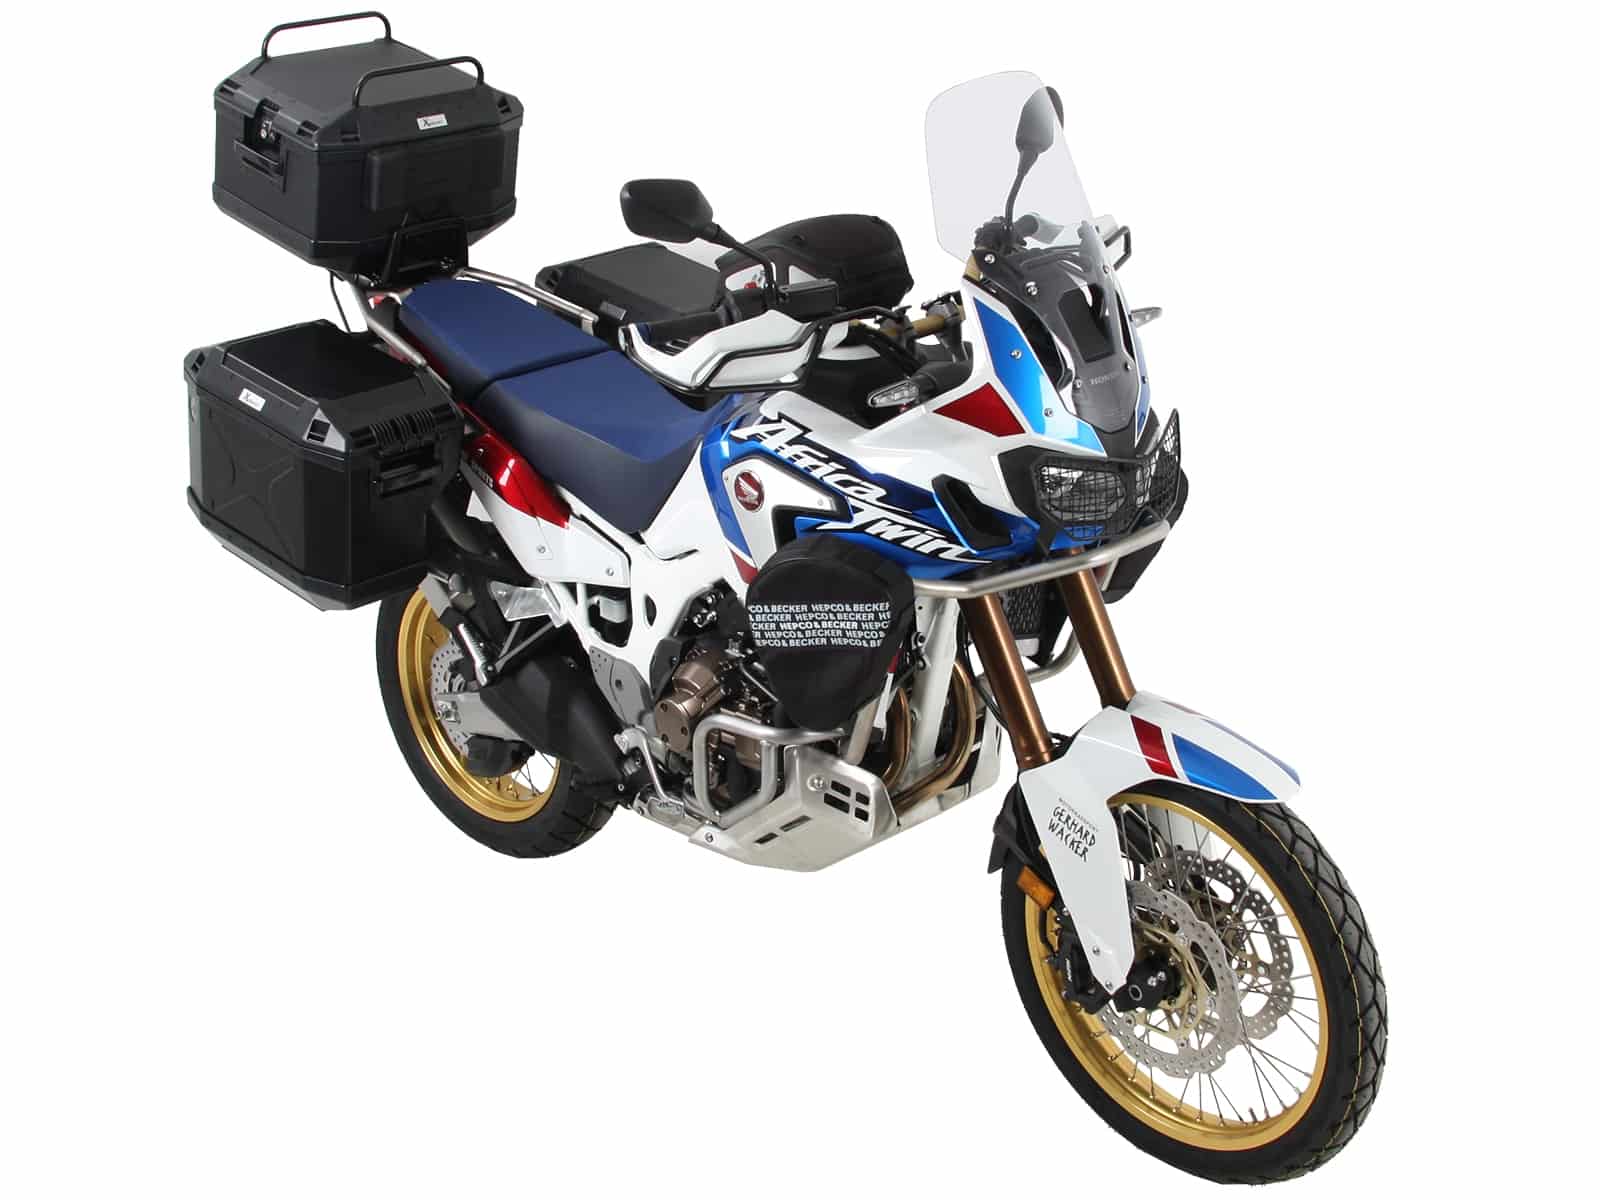 Alurack top case carrier black for Honda CRF1000L Africa Twin Adventure Sports (2018-2019)